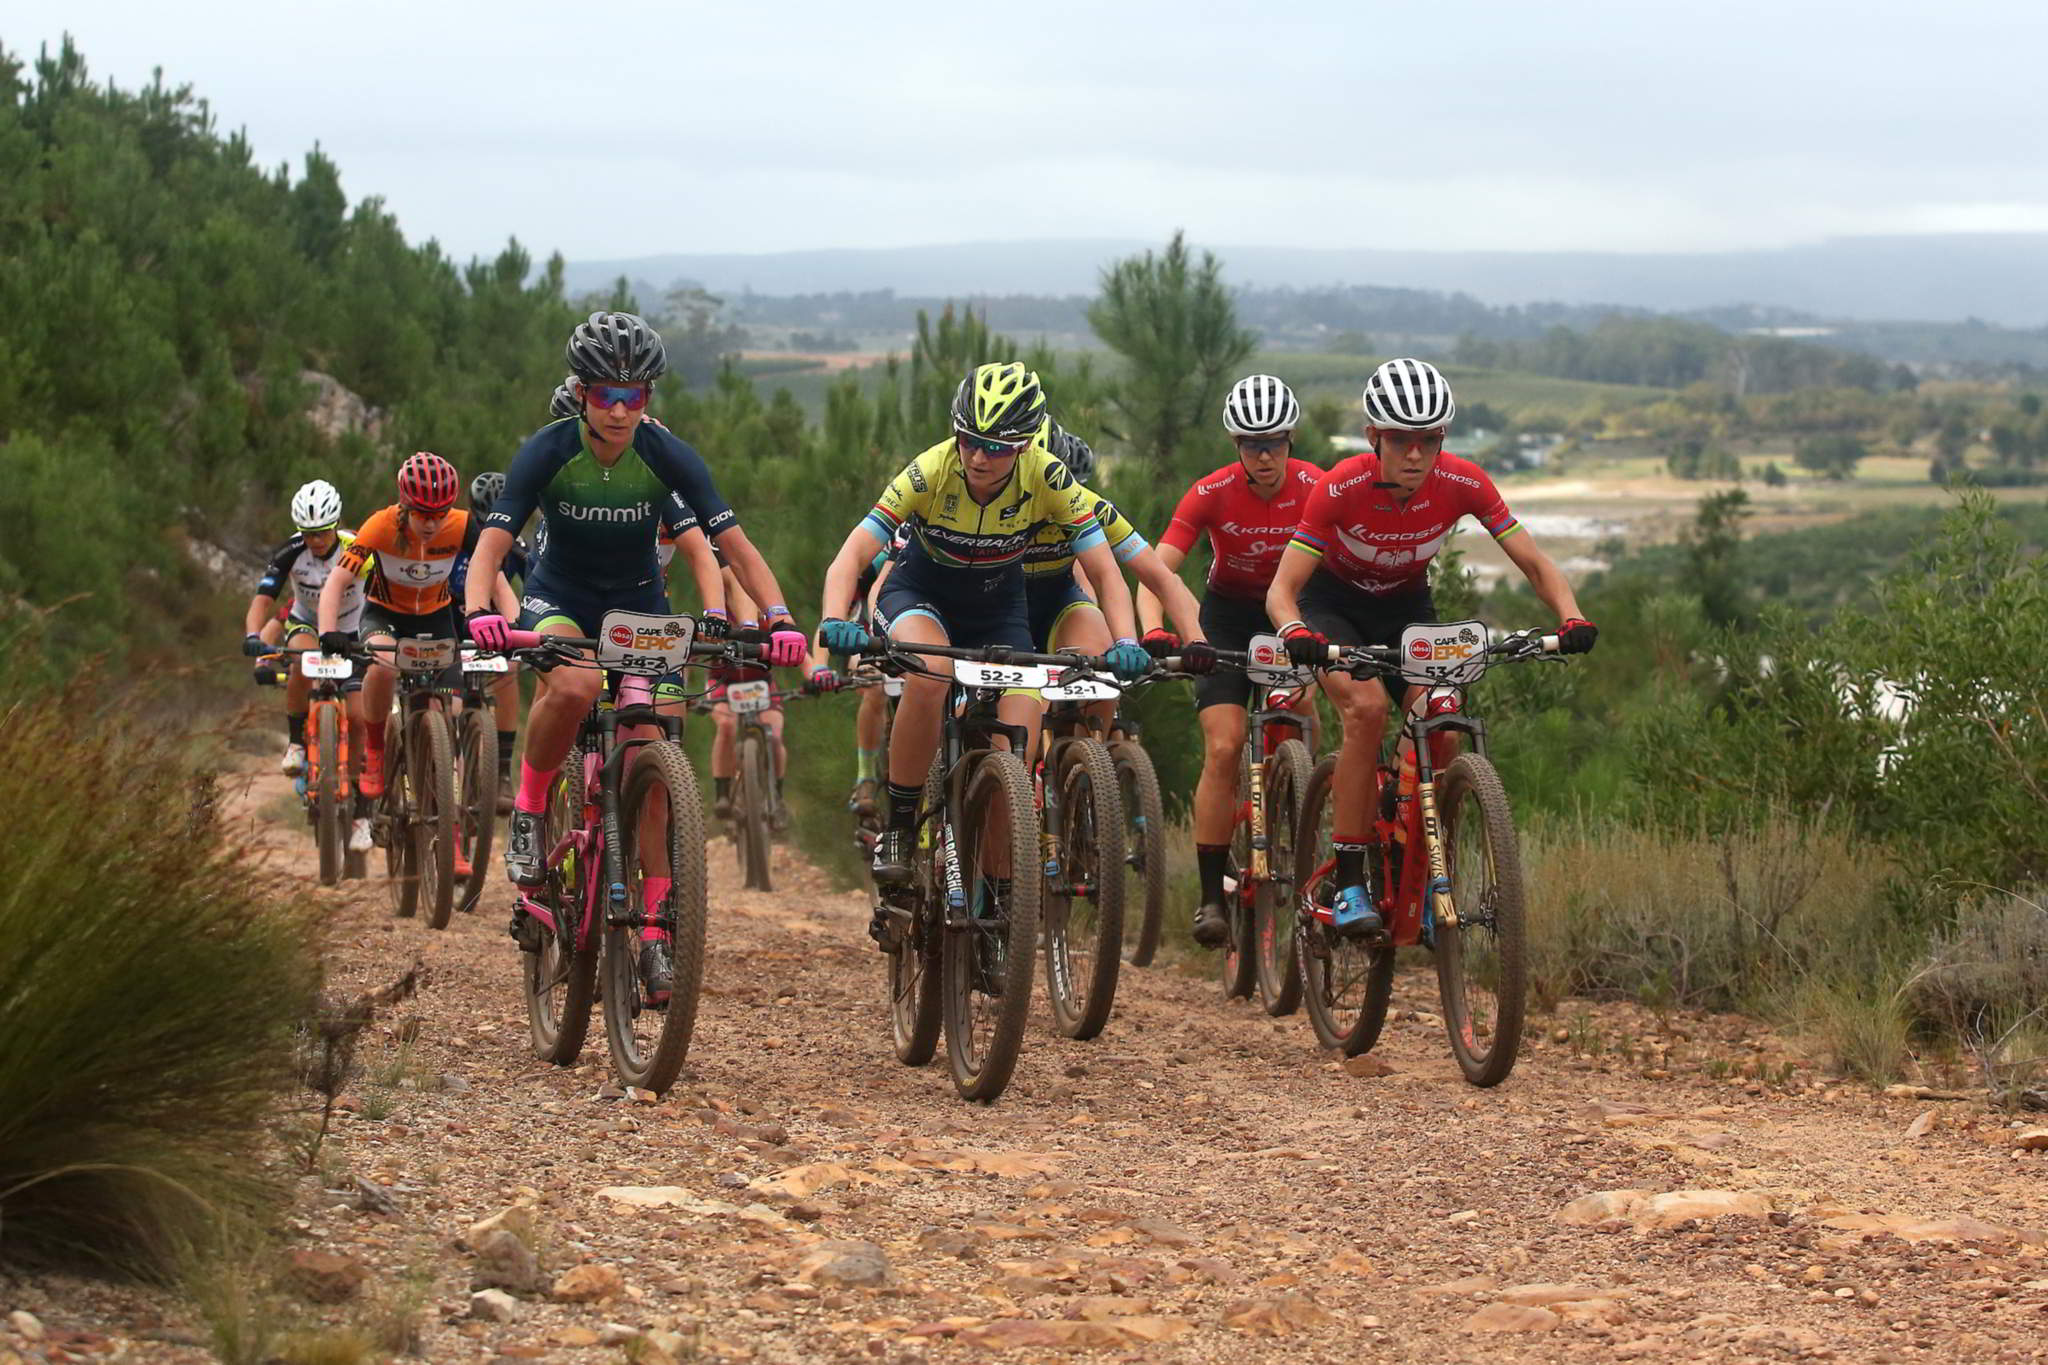 Photo by Shaun Roy/Cape Epic